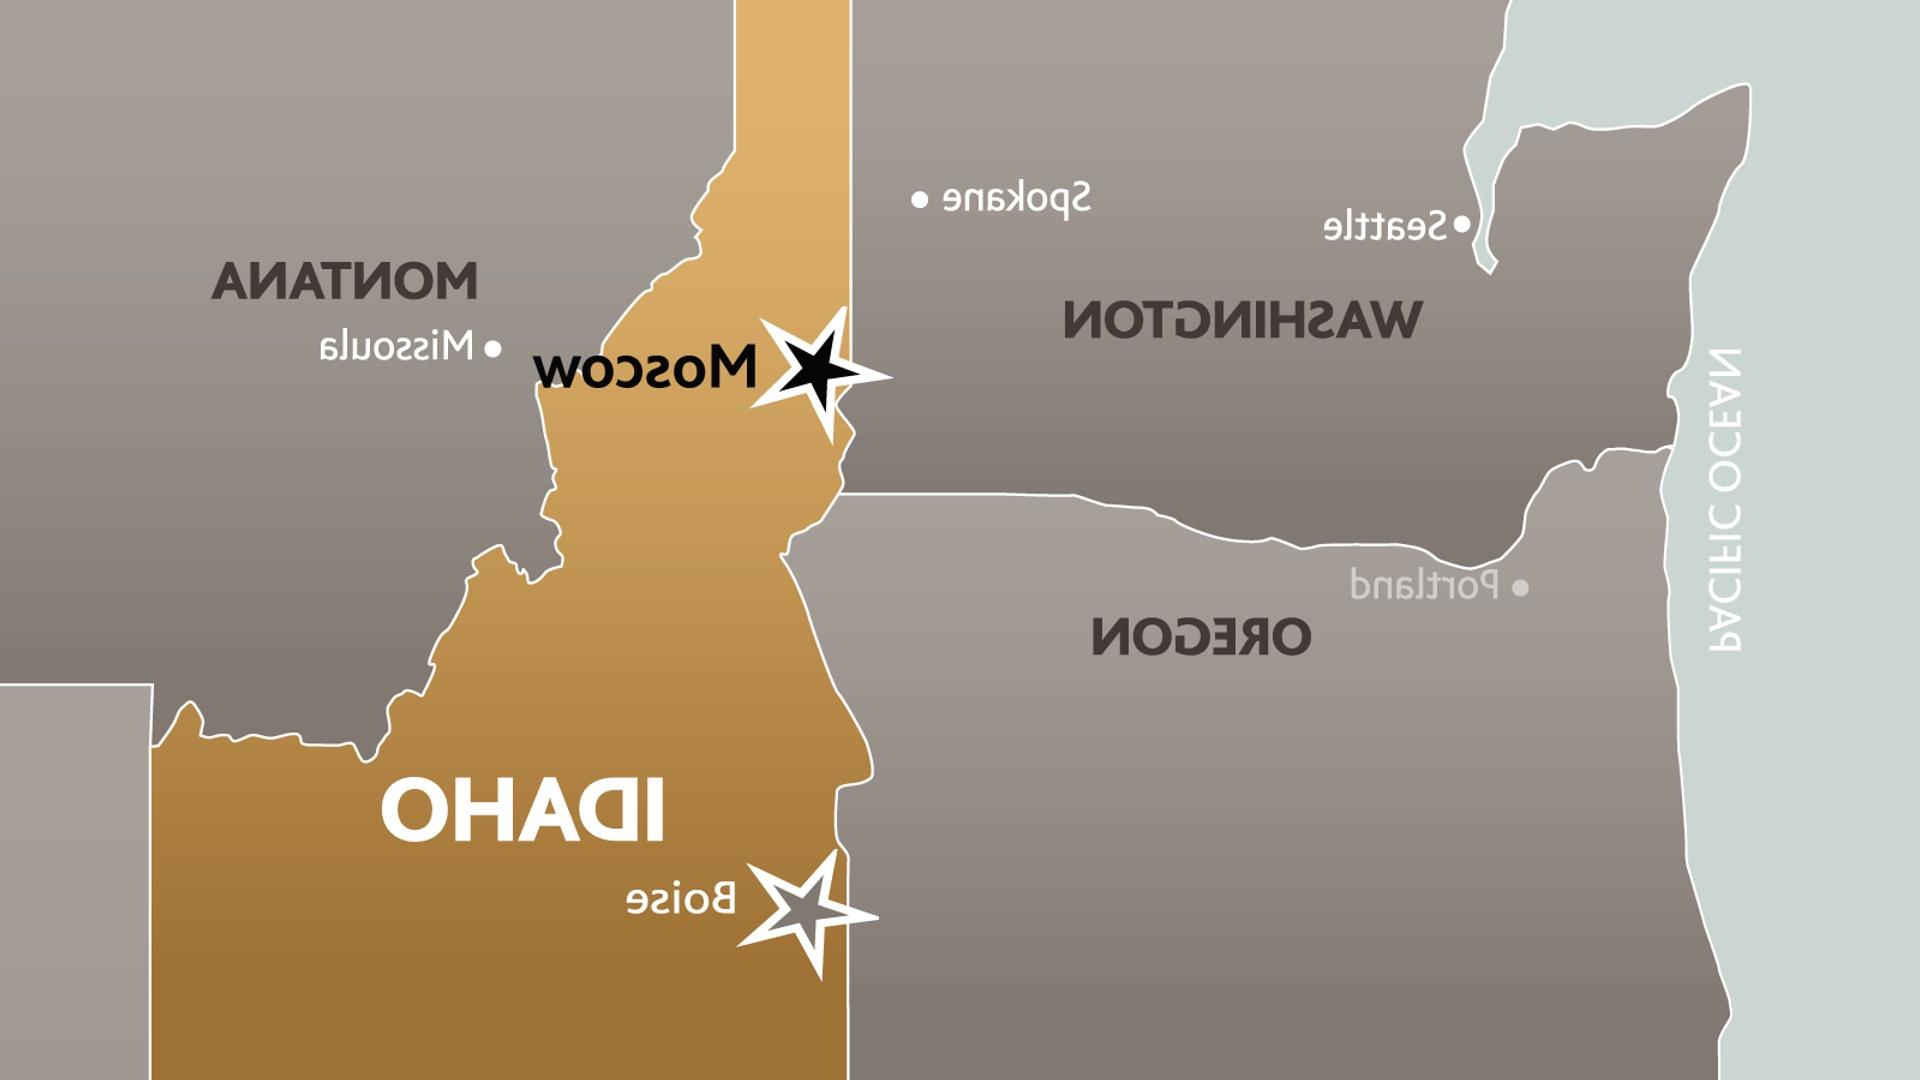  A map of Idaho and surrounding state with Moscow and Boise's locations marked with a star. 